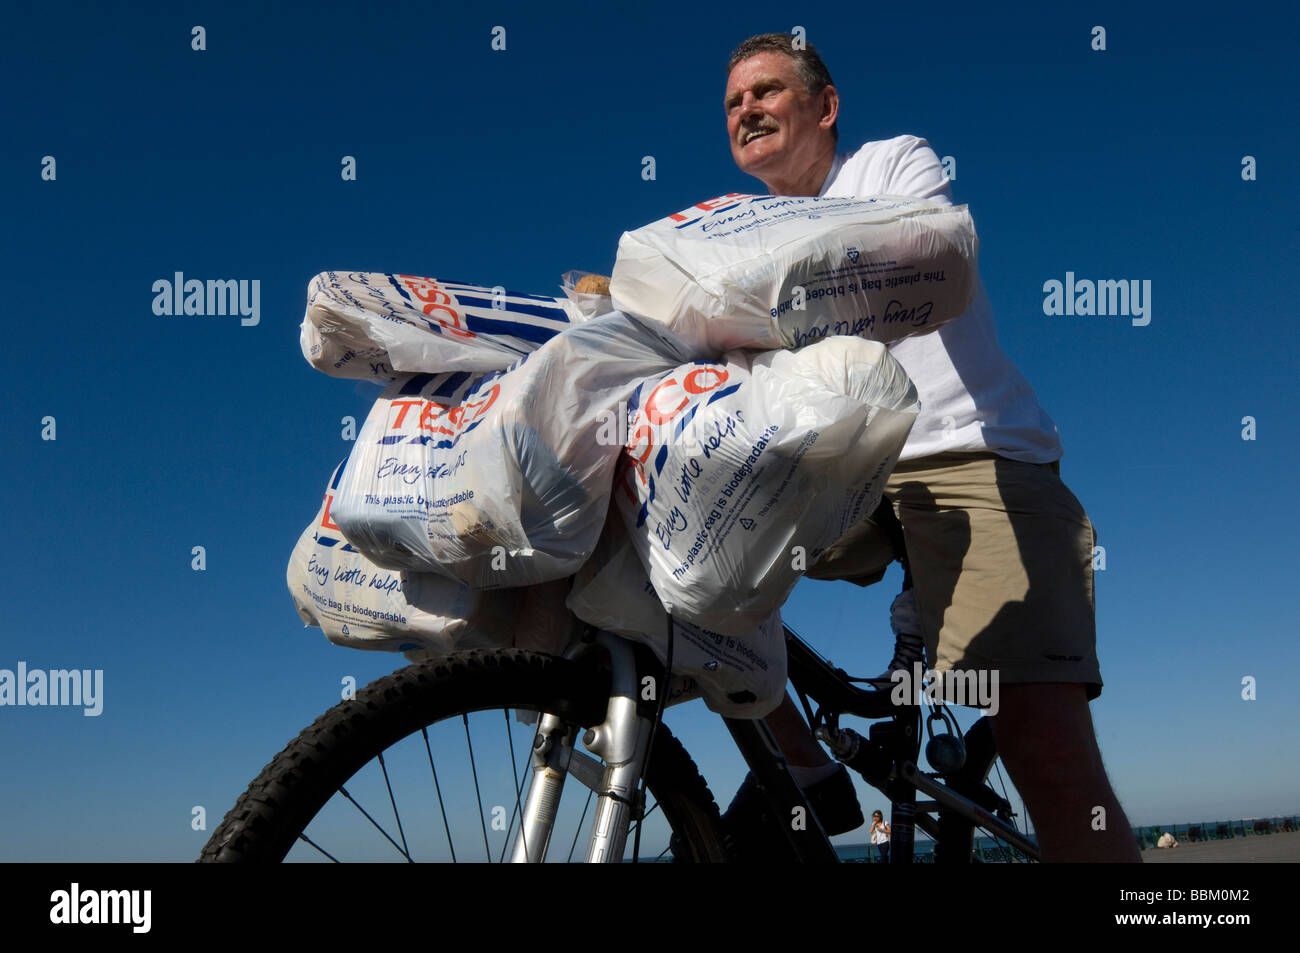 A man coming back from shopping at Tesco on a bike with laden with plastic bags full of groceries. Stock Photo